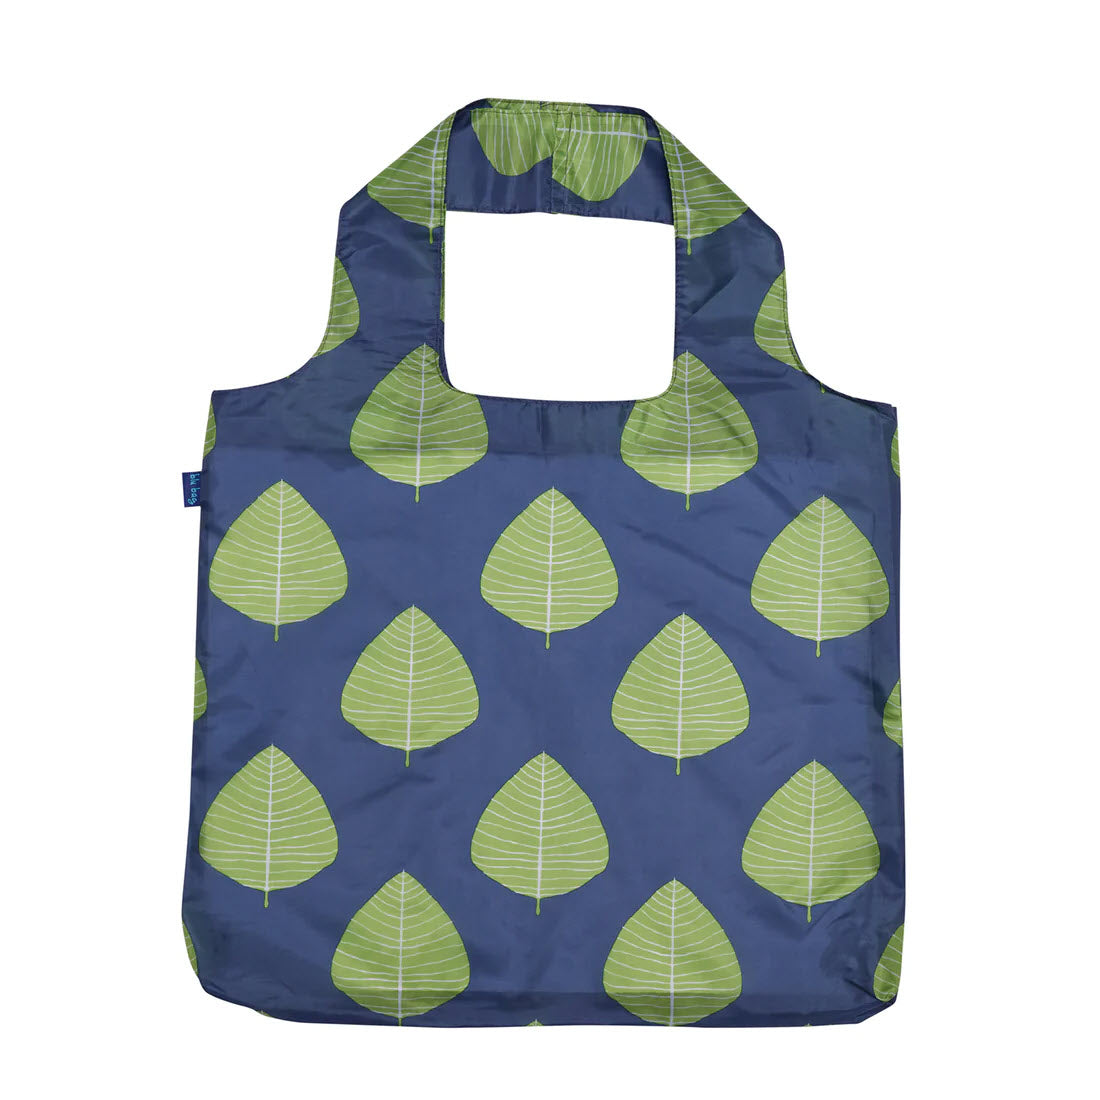 A reusable shopping bag with a dark blue background and a pattern of green leaf prints, featuring built-in handles and designed as the Rockflowerpaper BLU BAG ASPEN LEAVES eco-friendly tote.